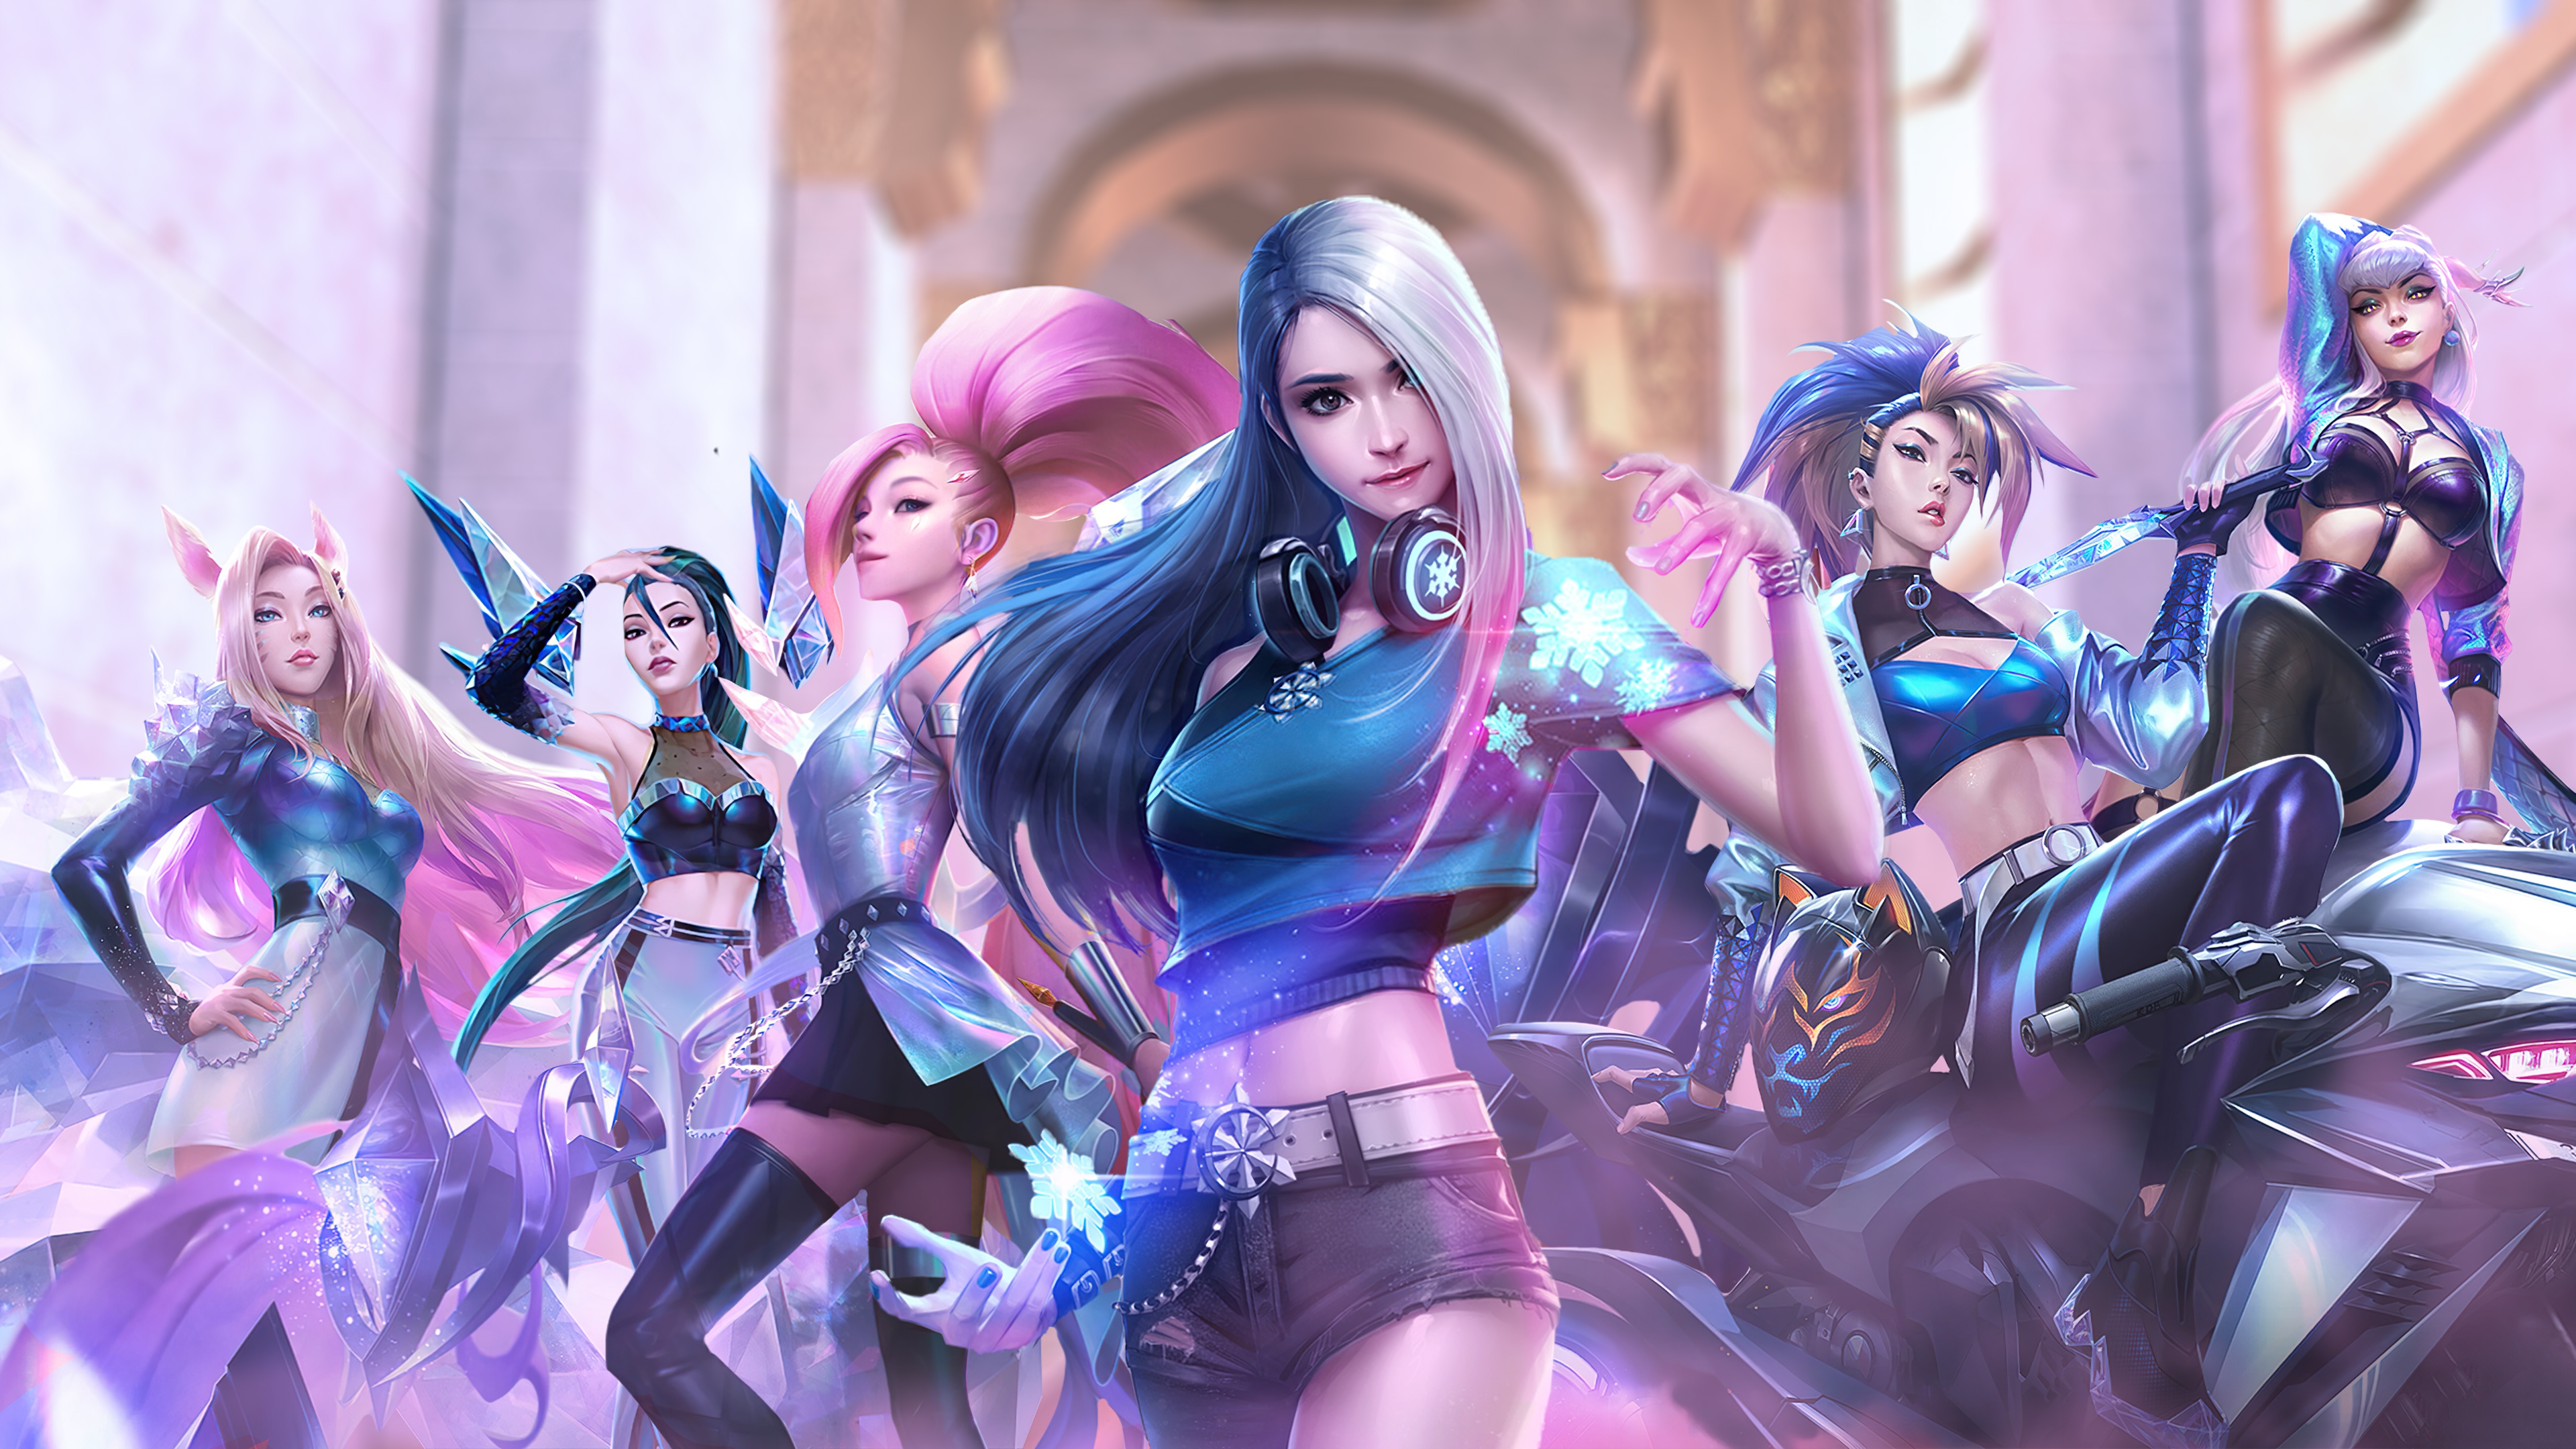 Video Game League Of Legends 3840x2160